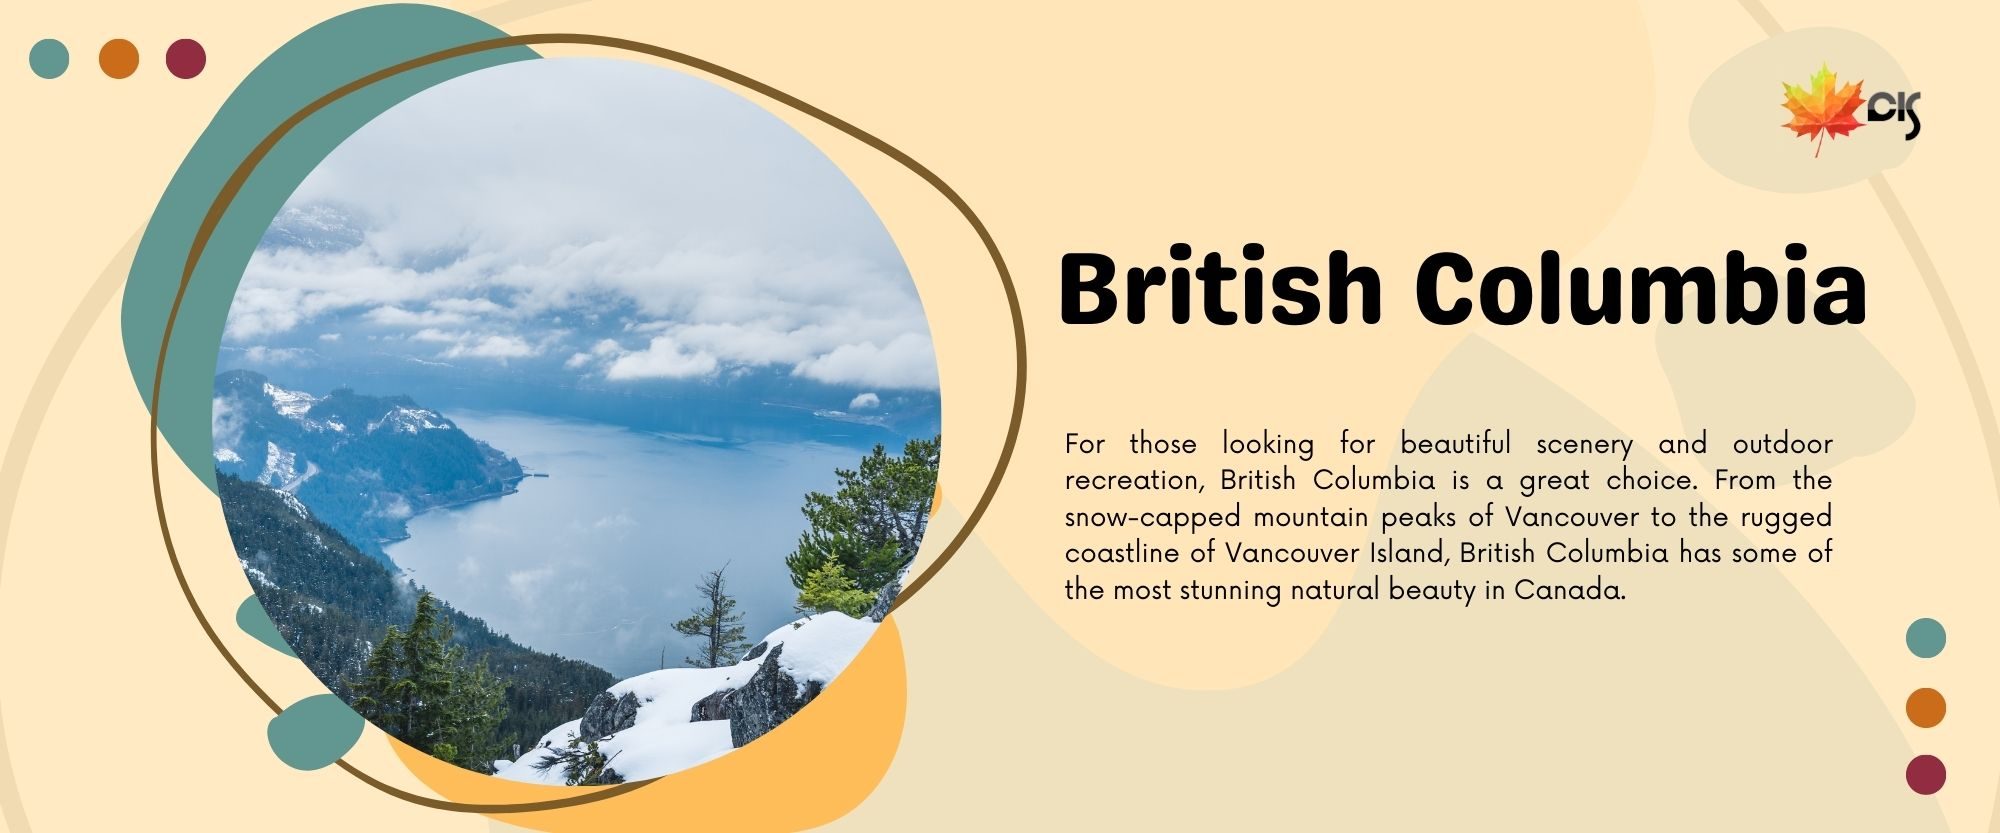 For those looking for beautiful scenery and outdoor recreation, British Columbia is a great choice. From the snow-capped mountain peaks of Vancouver to the rugged coastline of Vancouver Island, British Columbia has some of the most stunning natural beauty in Canada.